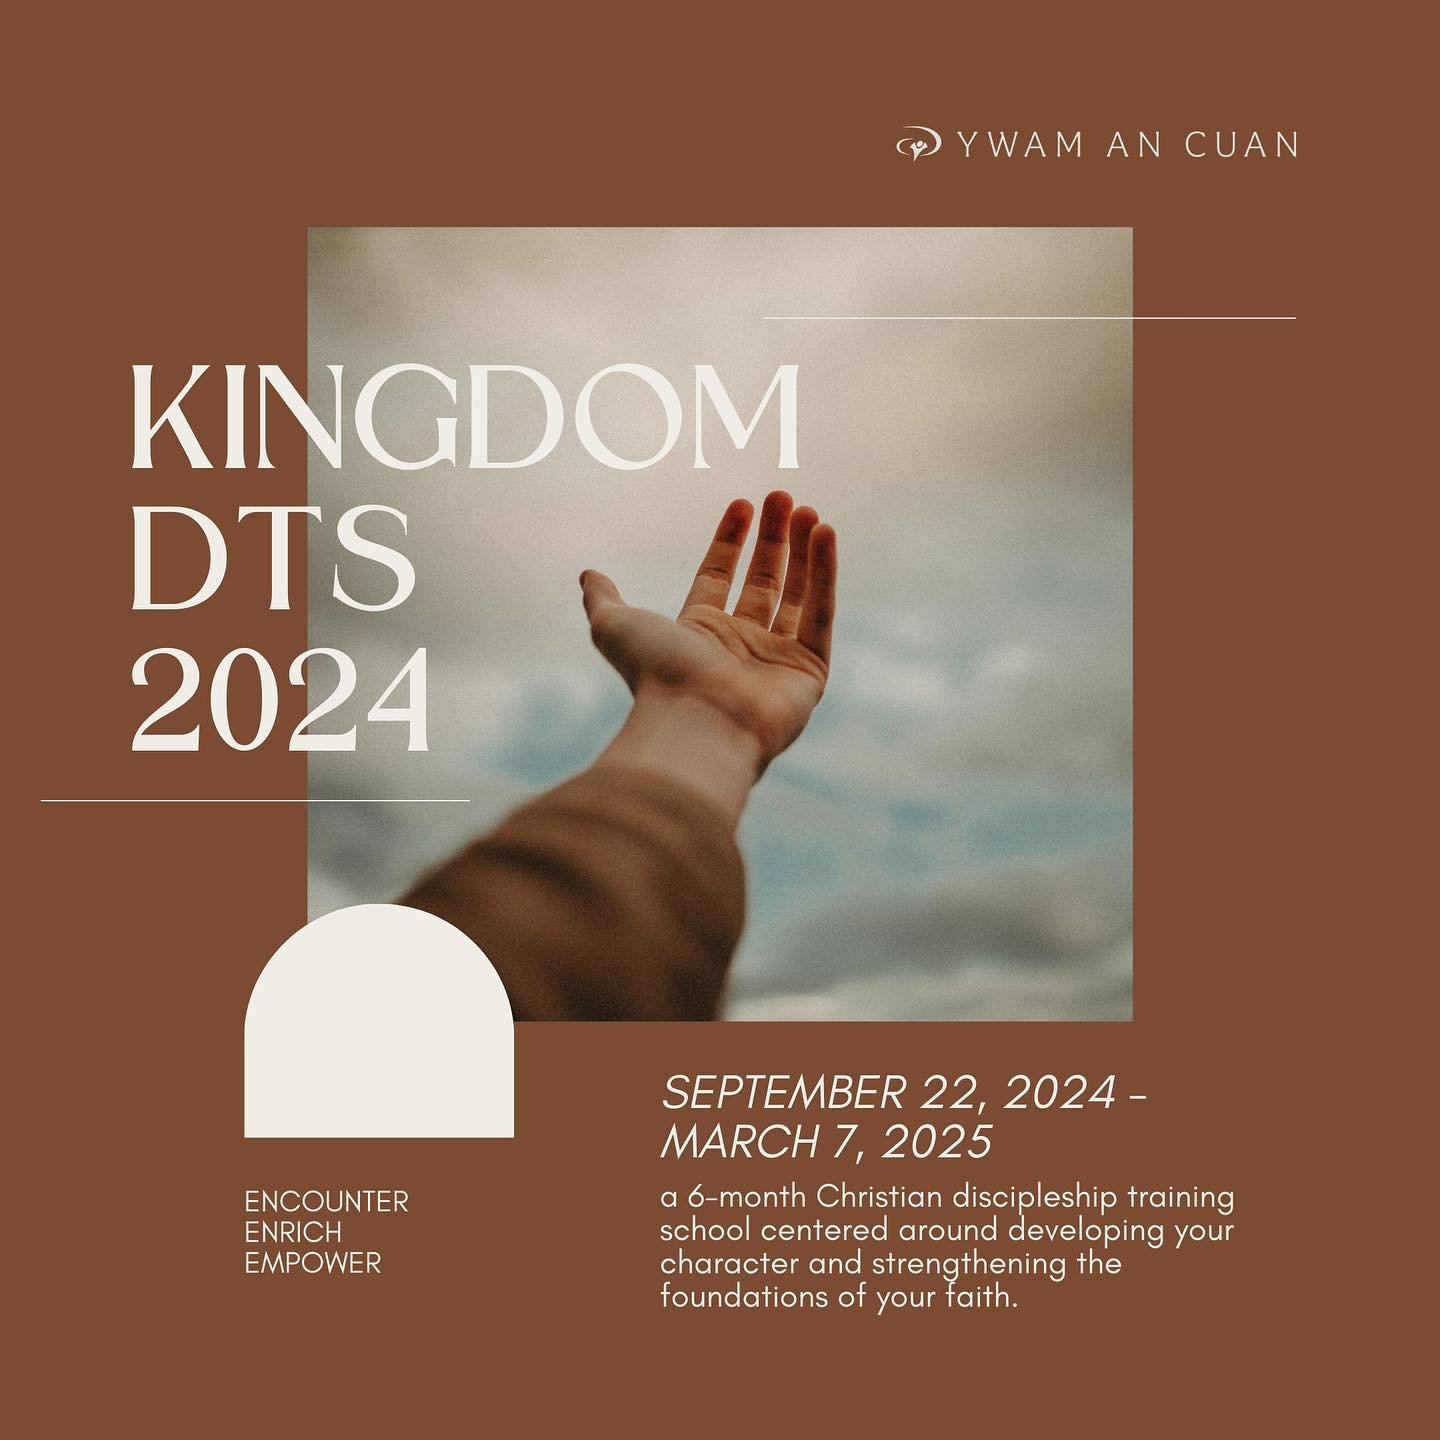 Introducing our Kingdom Discipleship Training School 2024 starting September 22! The Kingdom DTS is a 6-month Christian discipleship intensive centered around developing your character and strengthening the foundations of your faith.

For more inform